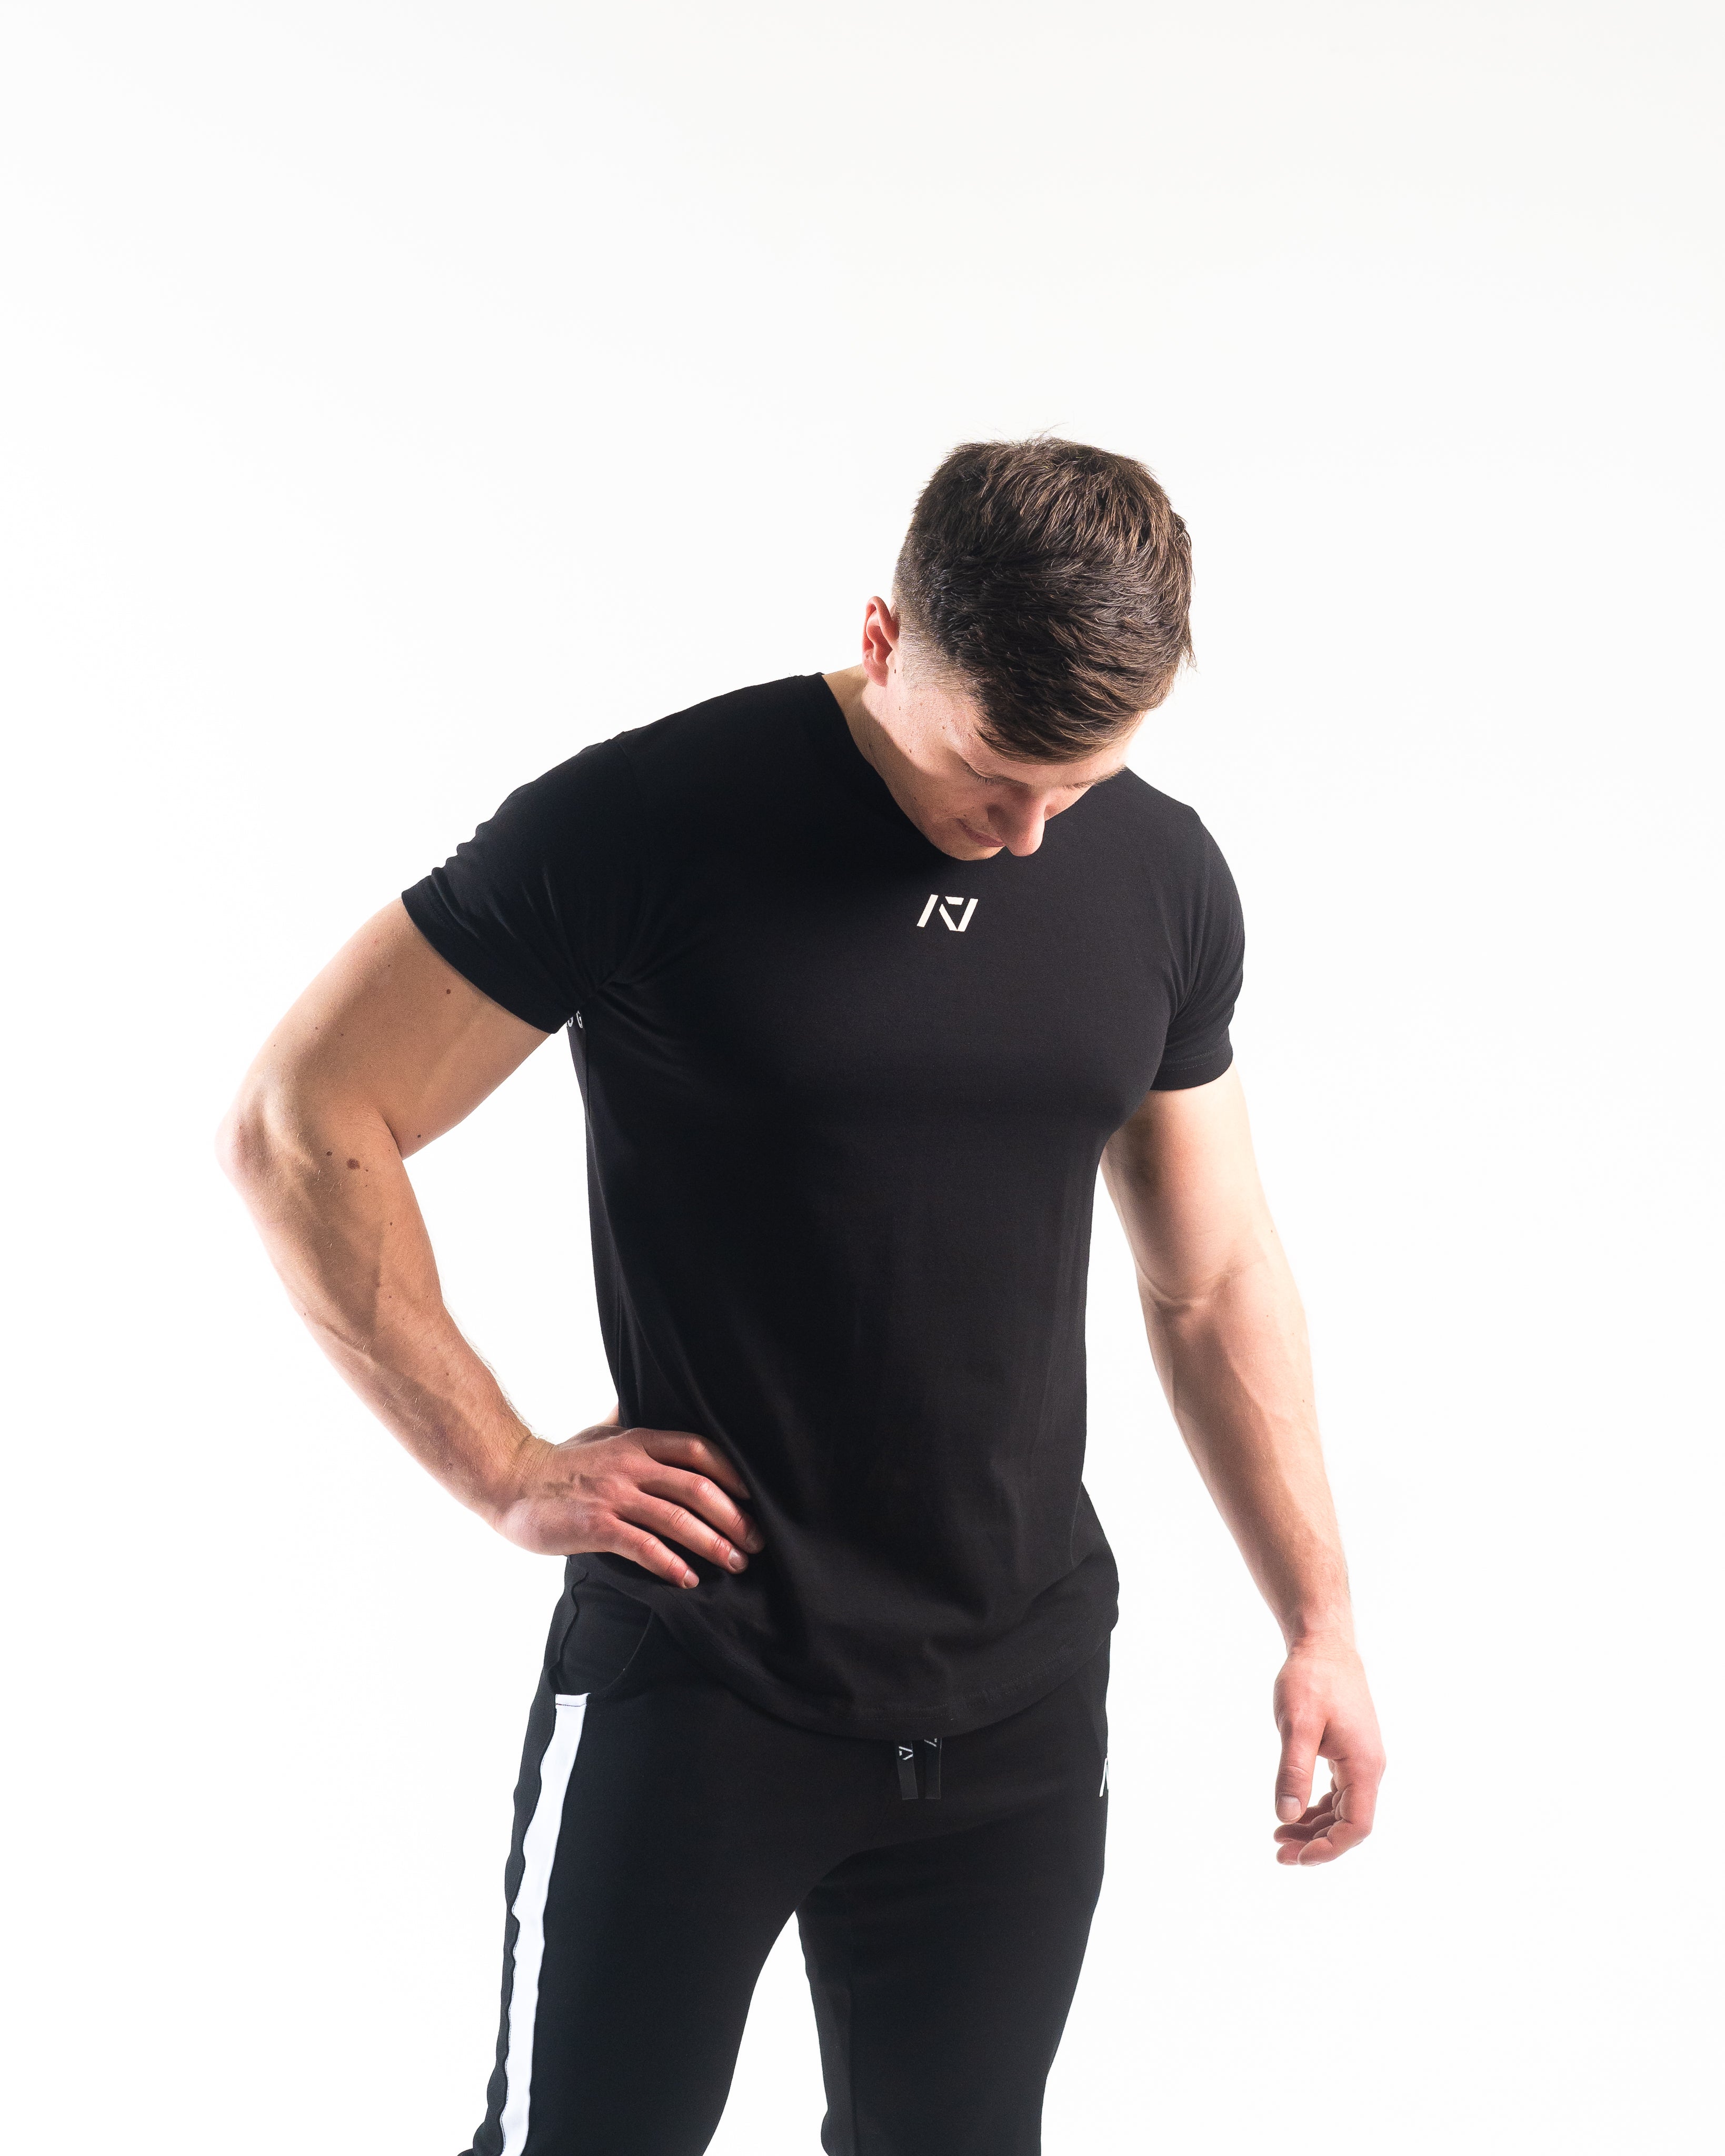 Stealth is our classic black on black shirt design. With the Stealth shirt you can be noticed, yet still, be able to be subtle. With the Stealth Bar Grip Shirt you can be noticed, yet still, be able to be subtle. The A7 silicone bar grip helps with slippery commercial benches and bars and anchors the barbell to your back. All A7 Powerlifting Equipment shipping to UK, Norway, Switzerland and Iceland.